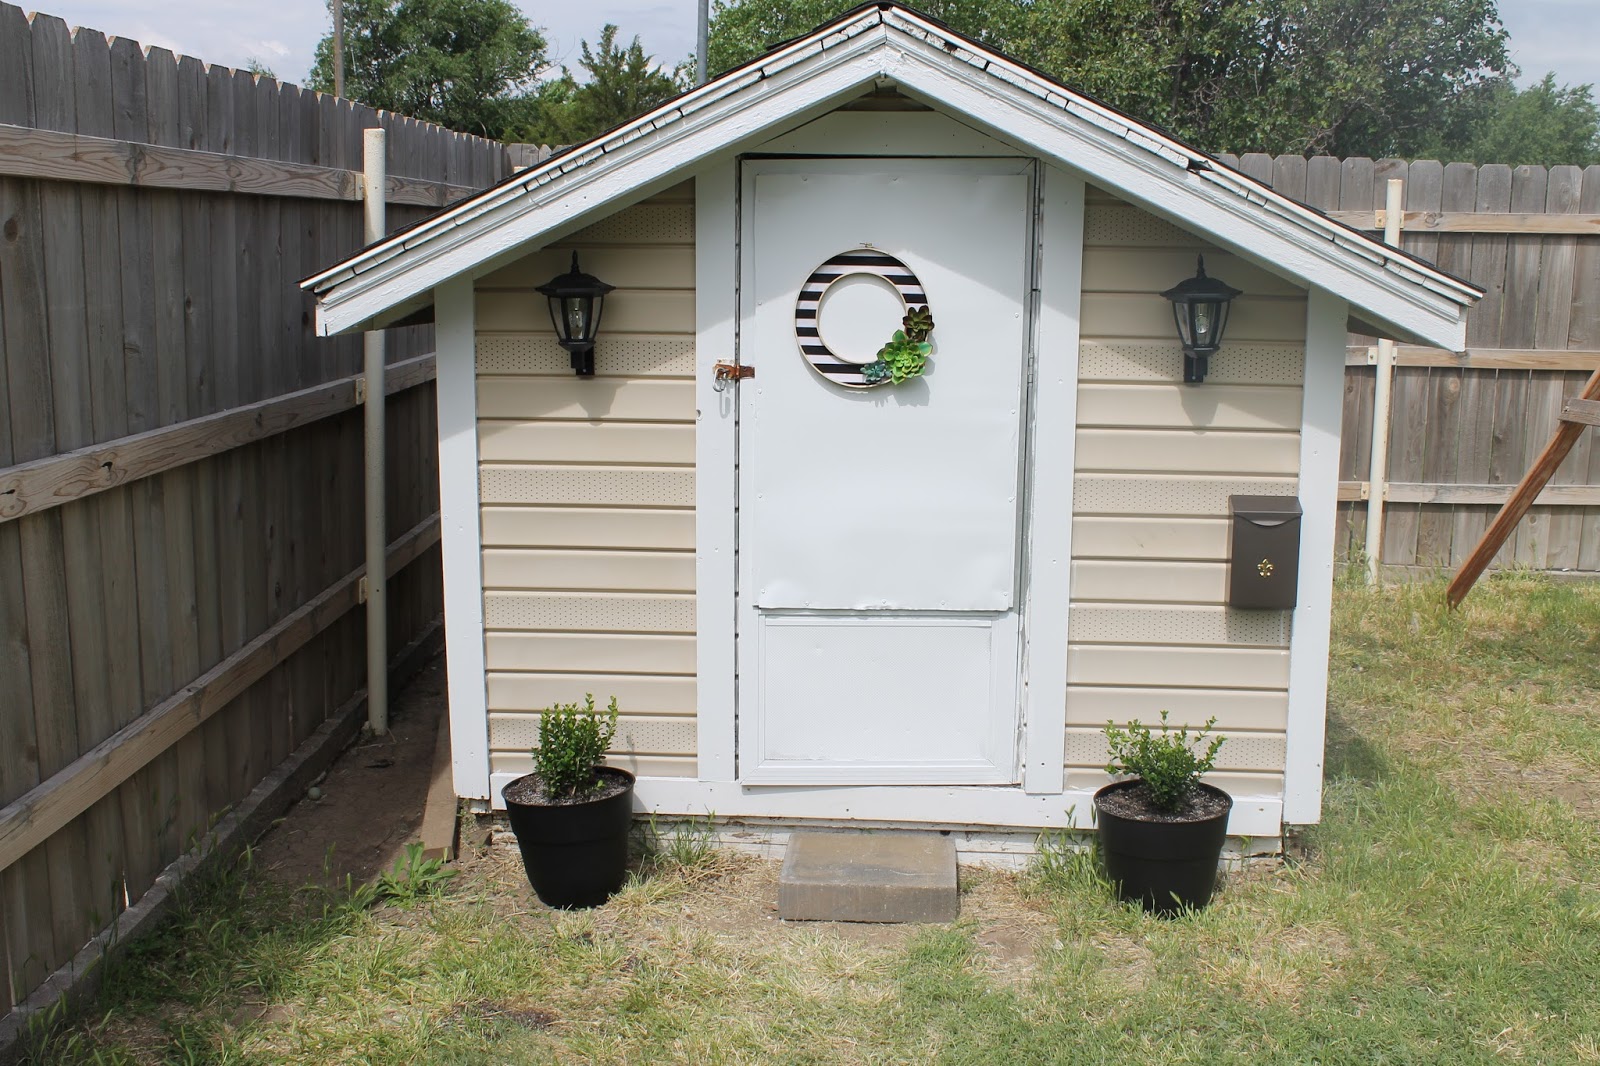 Lyndi's Projects: Ten Ideas for a Playhouse Exterior